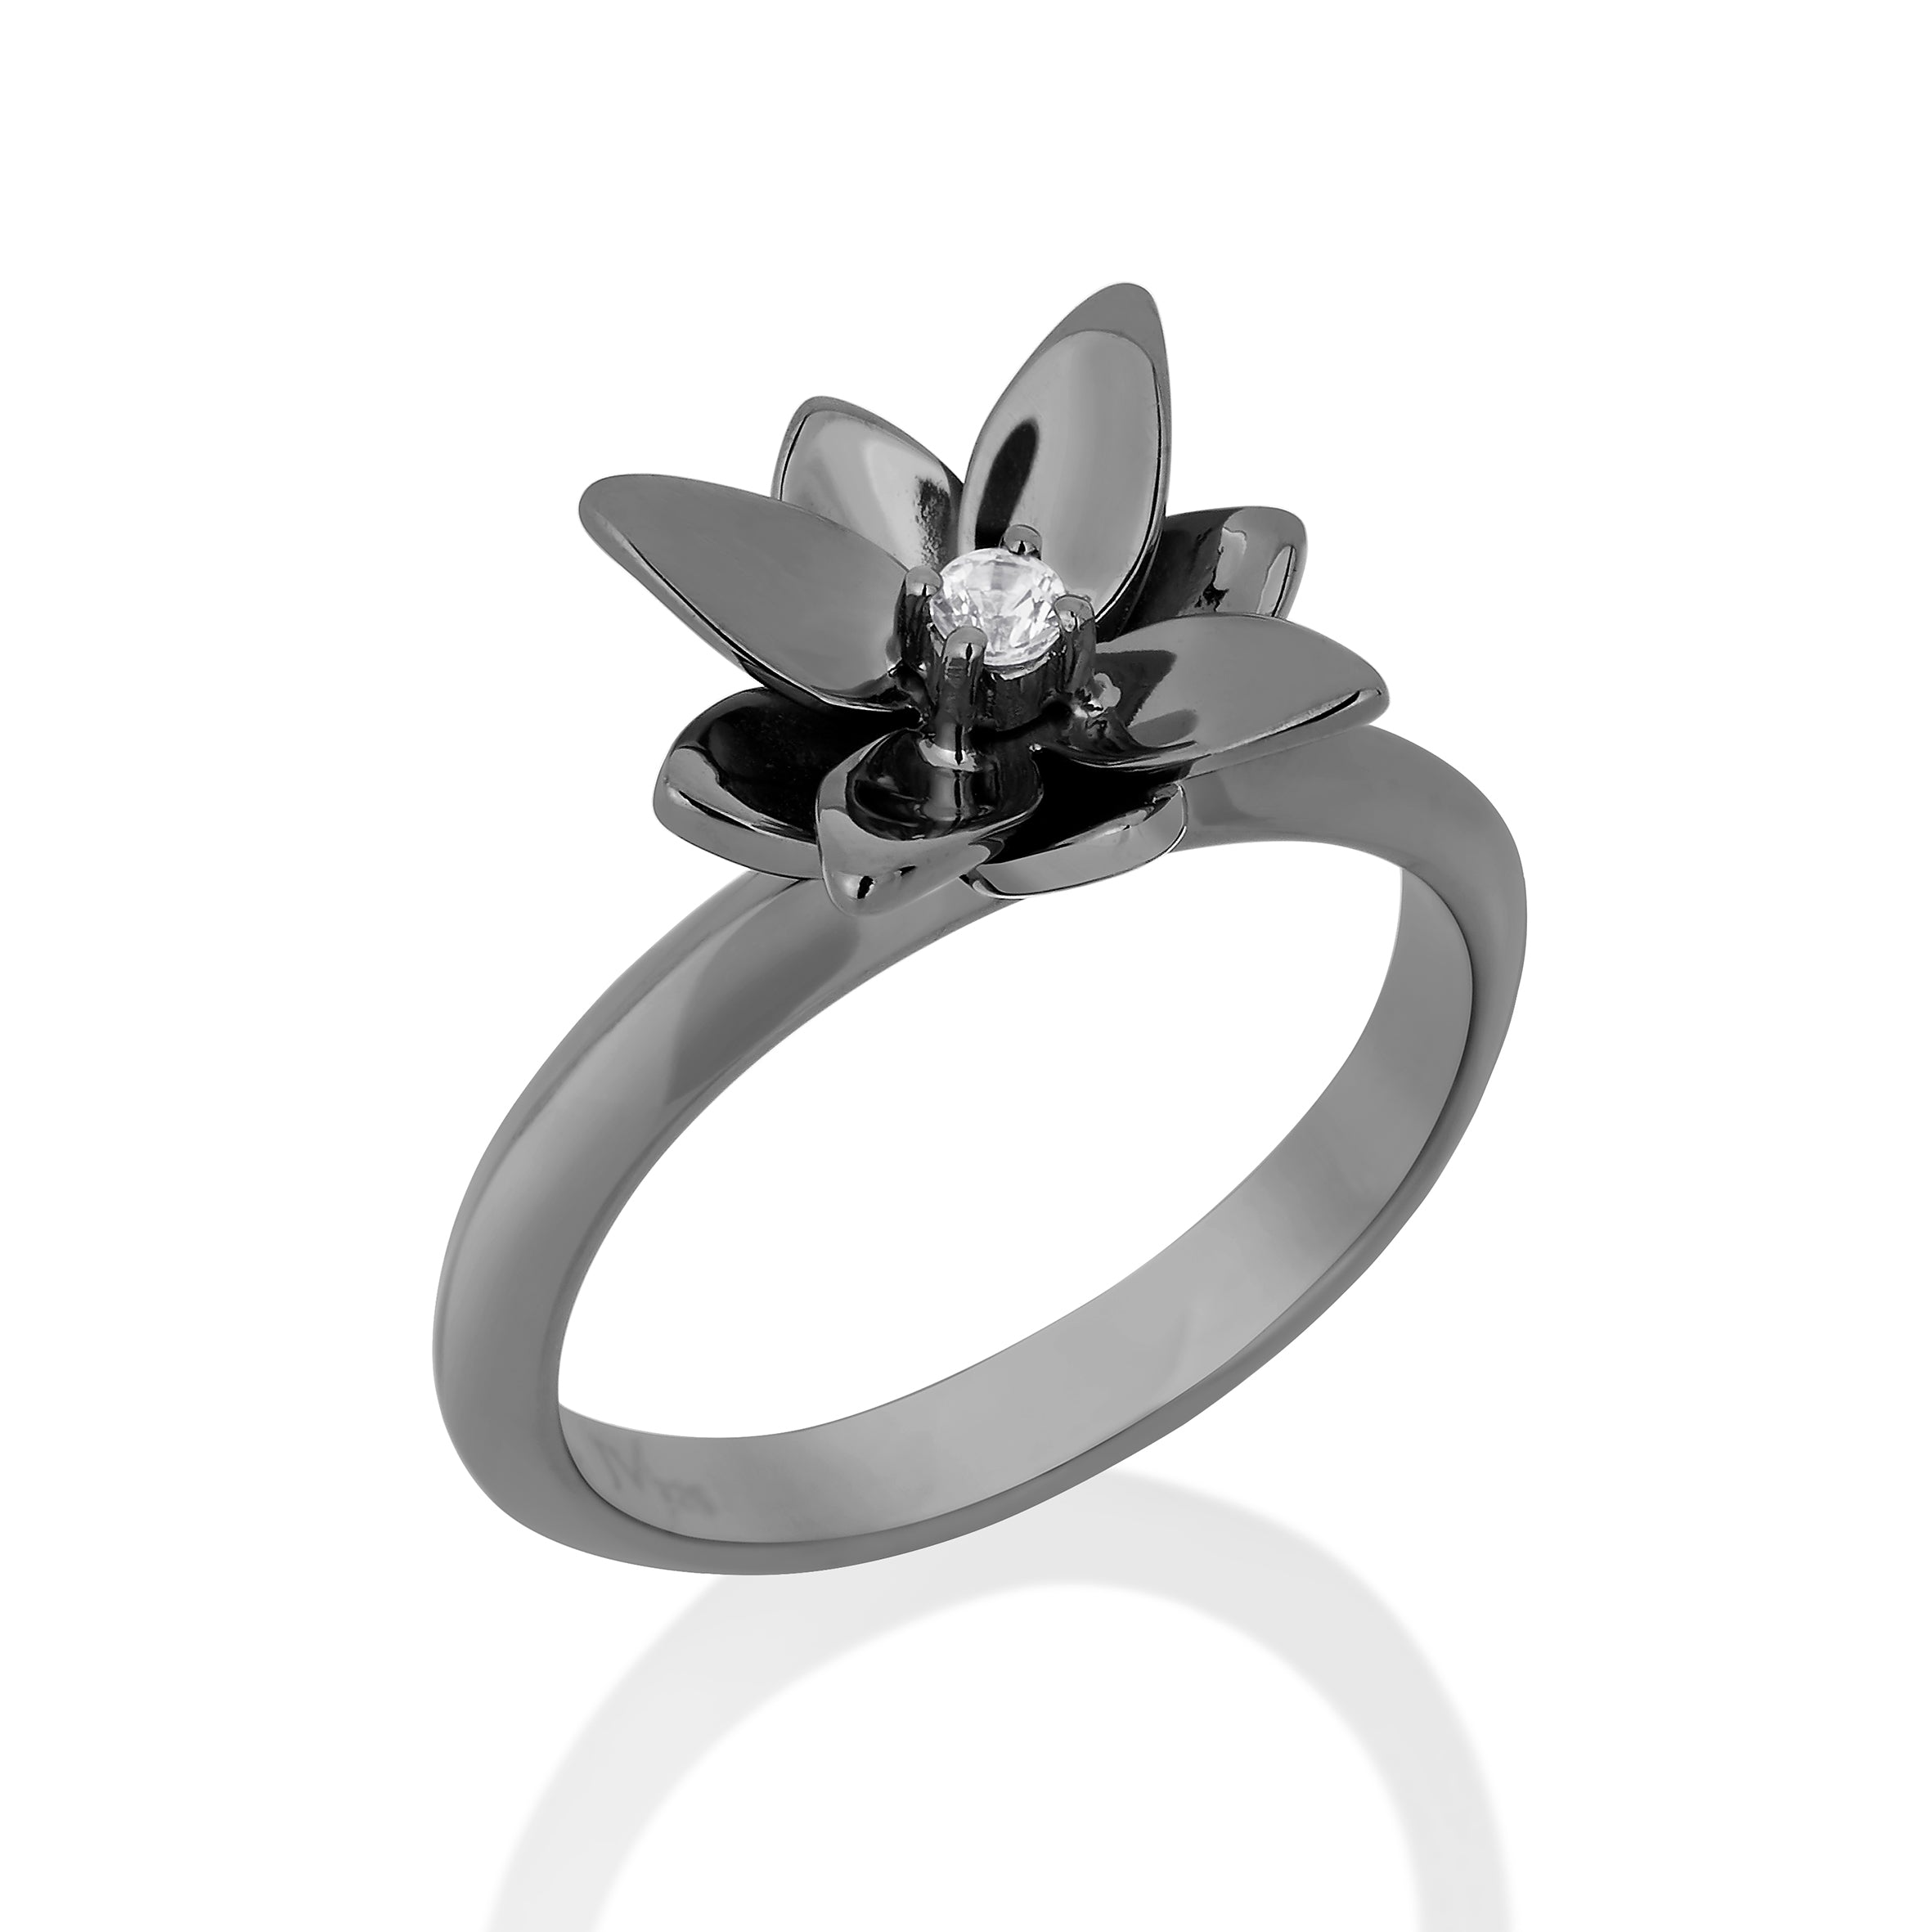 BLOSSOM MINI RING IN BLACK RHODIUM PLATED SILVER WITH COLORLESS SAPPHIRE